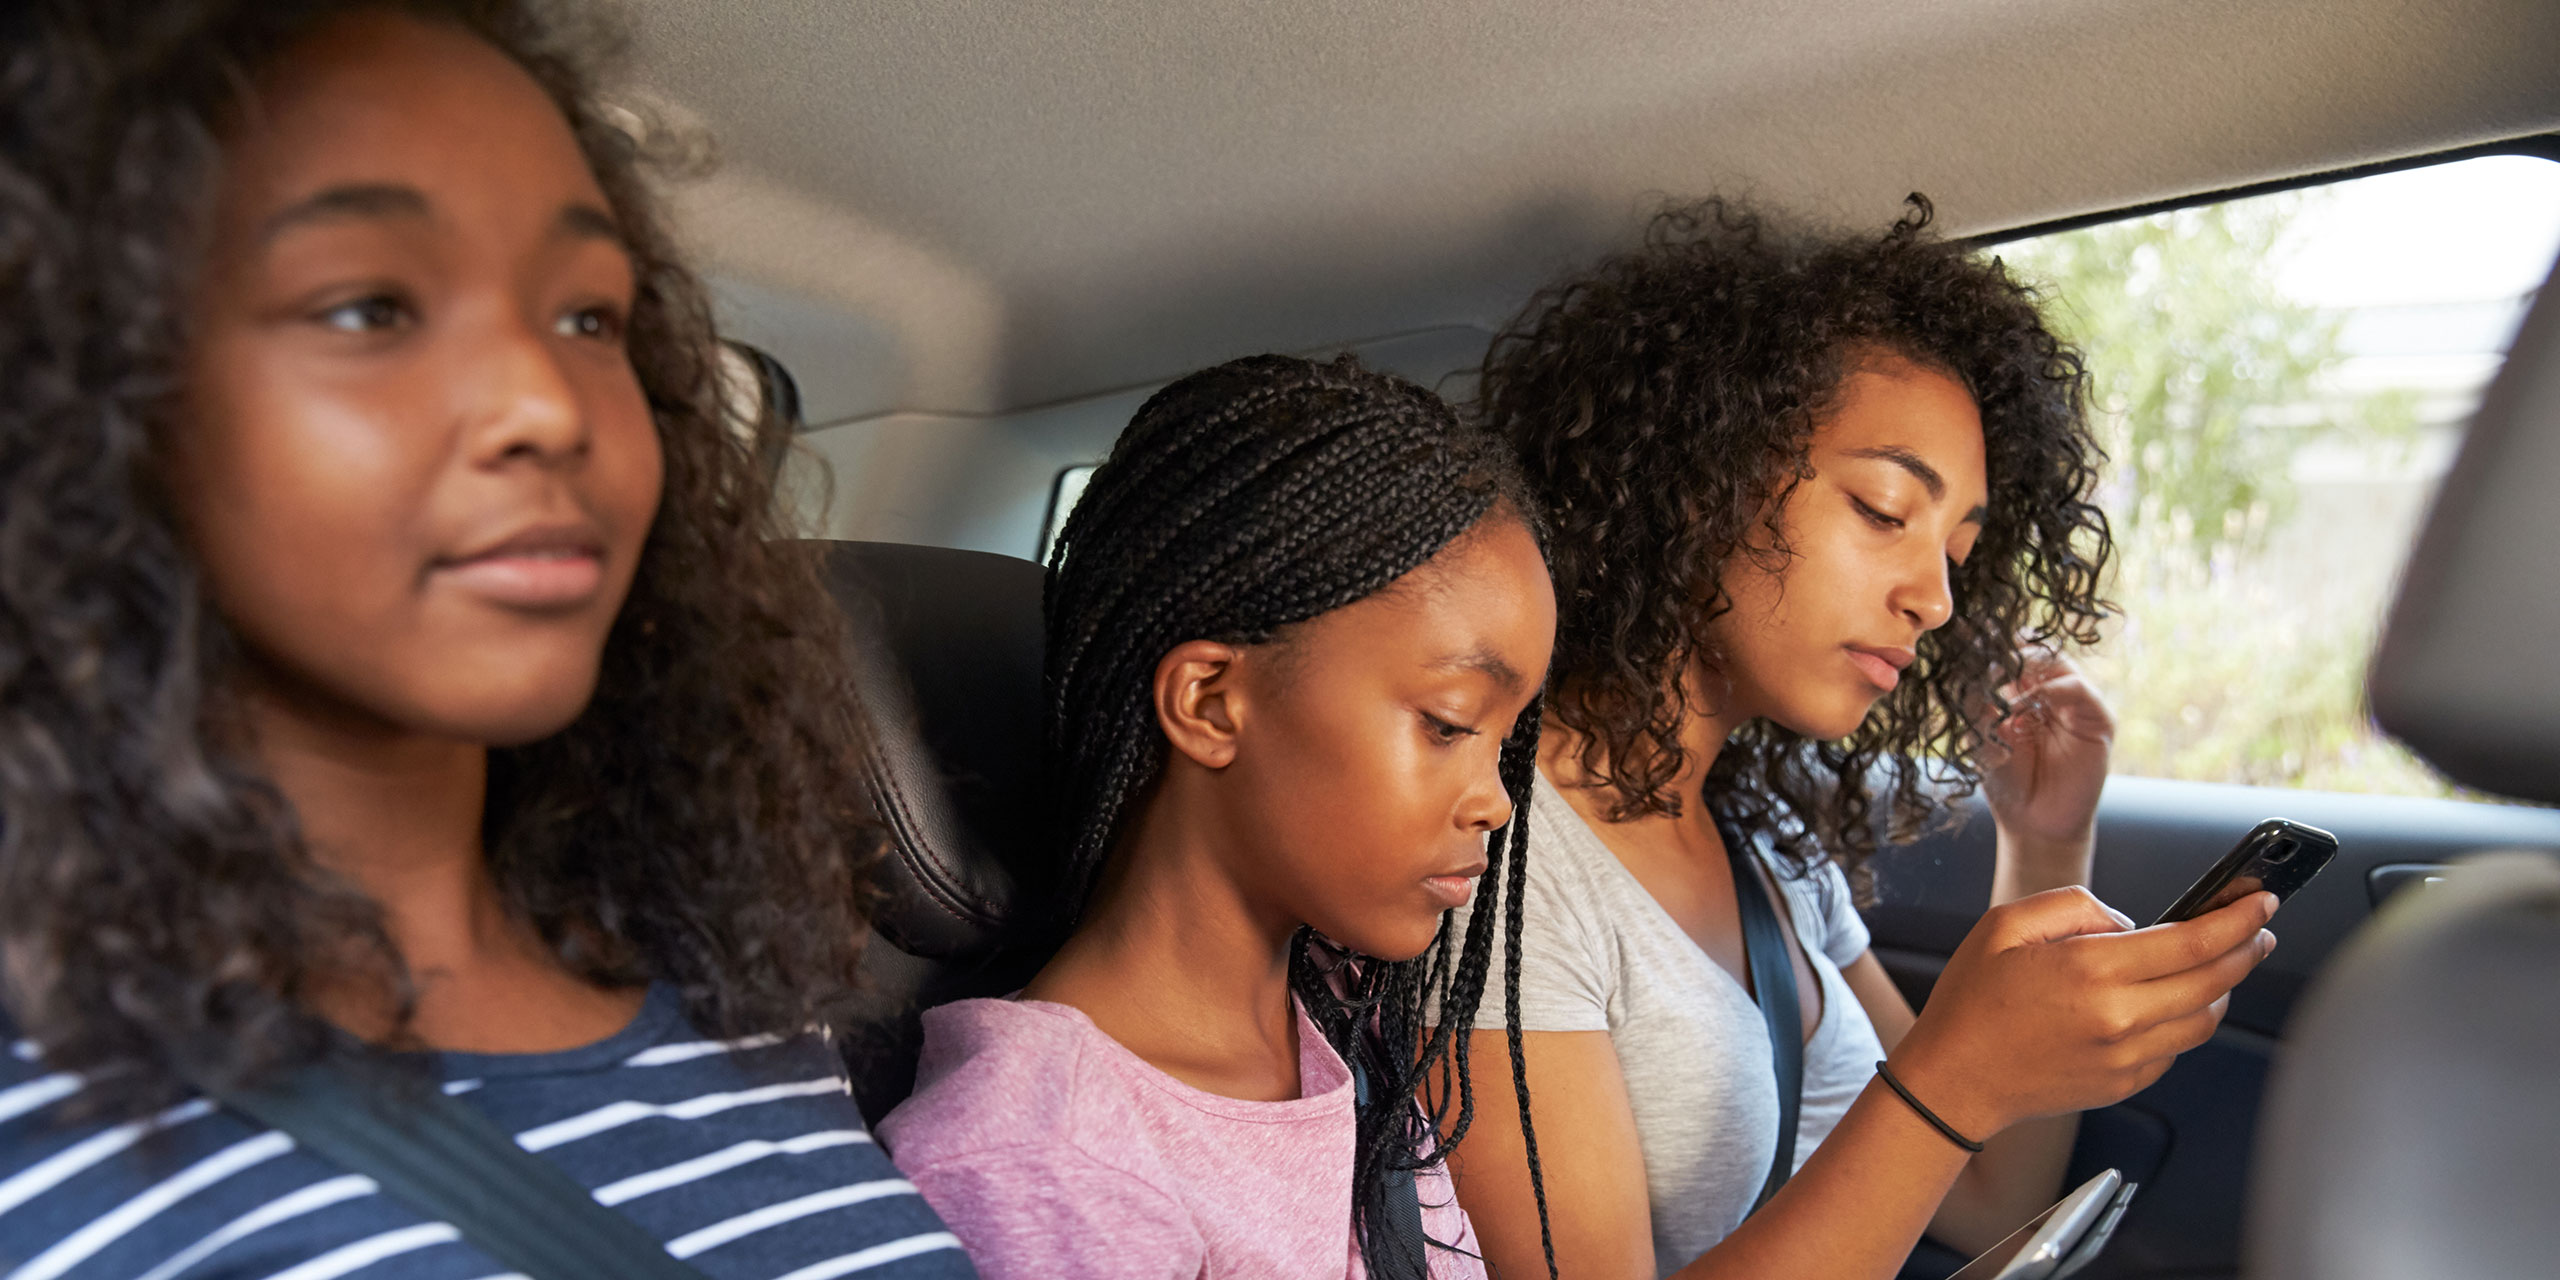 Teen Girls on Road Trip; Courtesy of Monkey Business Images/Shutterstock.com